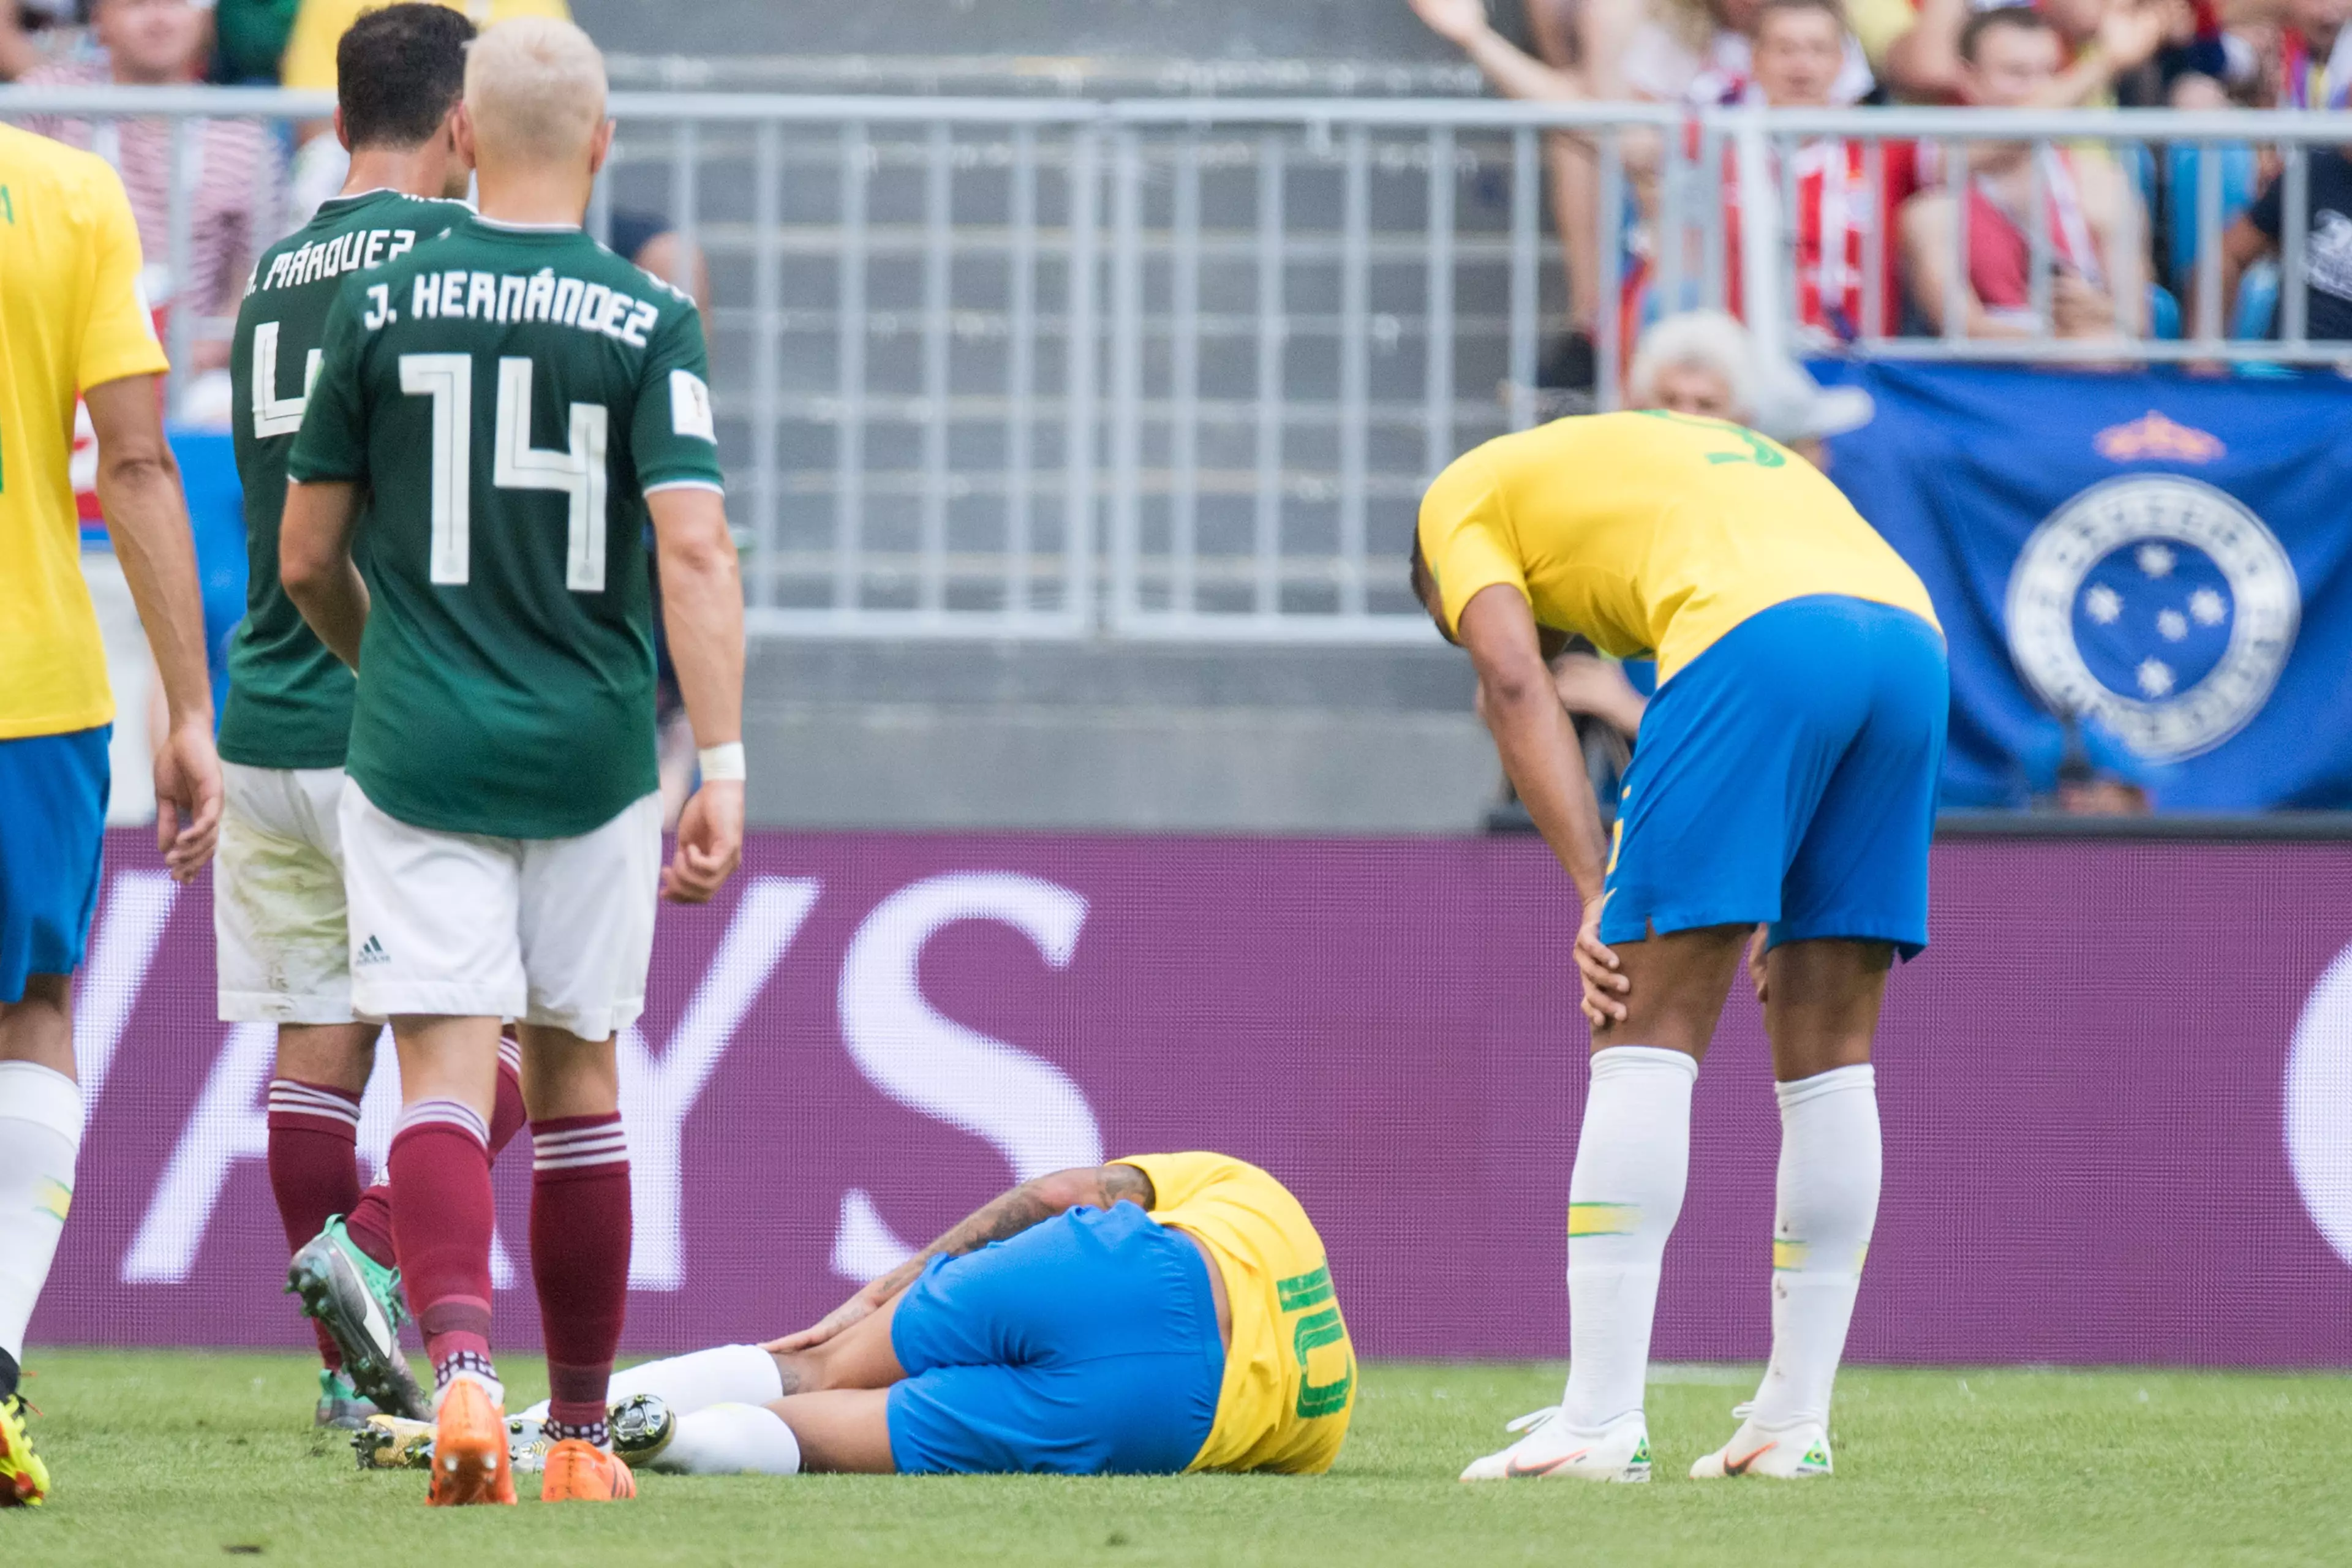 Has Neymar been shot again? Image: PA Images